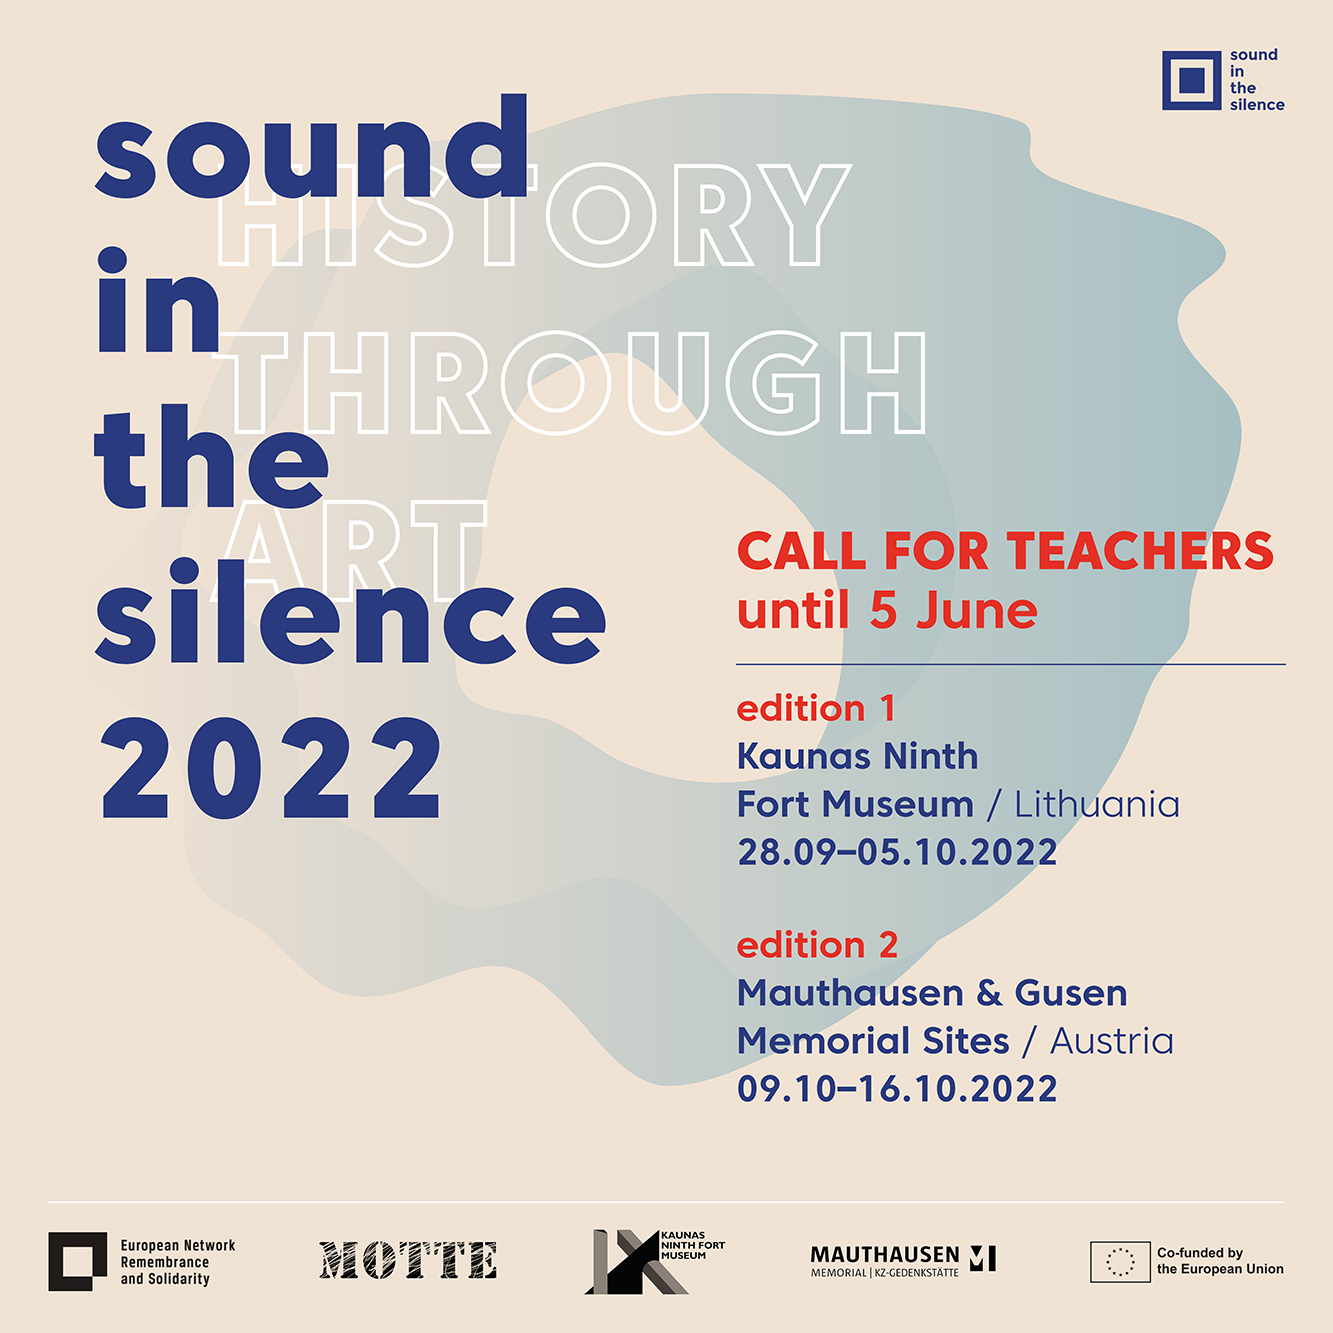 Call for teachers! Registration for Sound in the Silence is now open